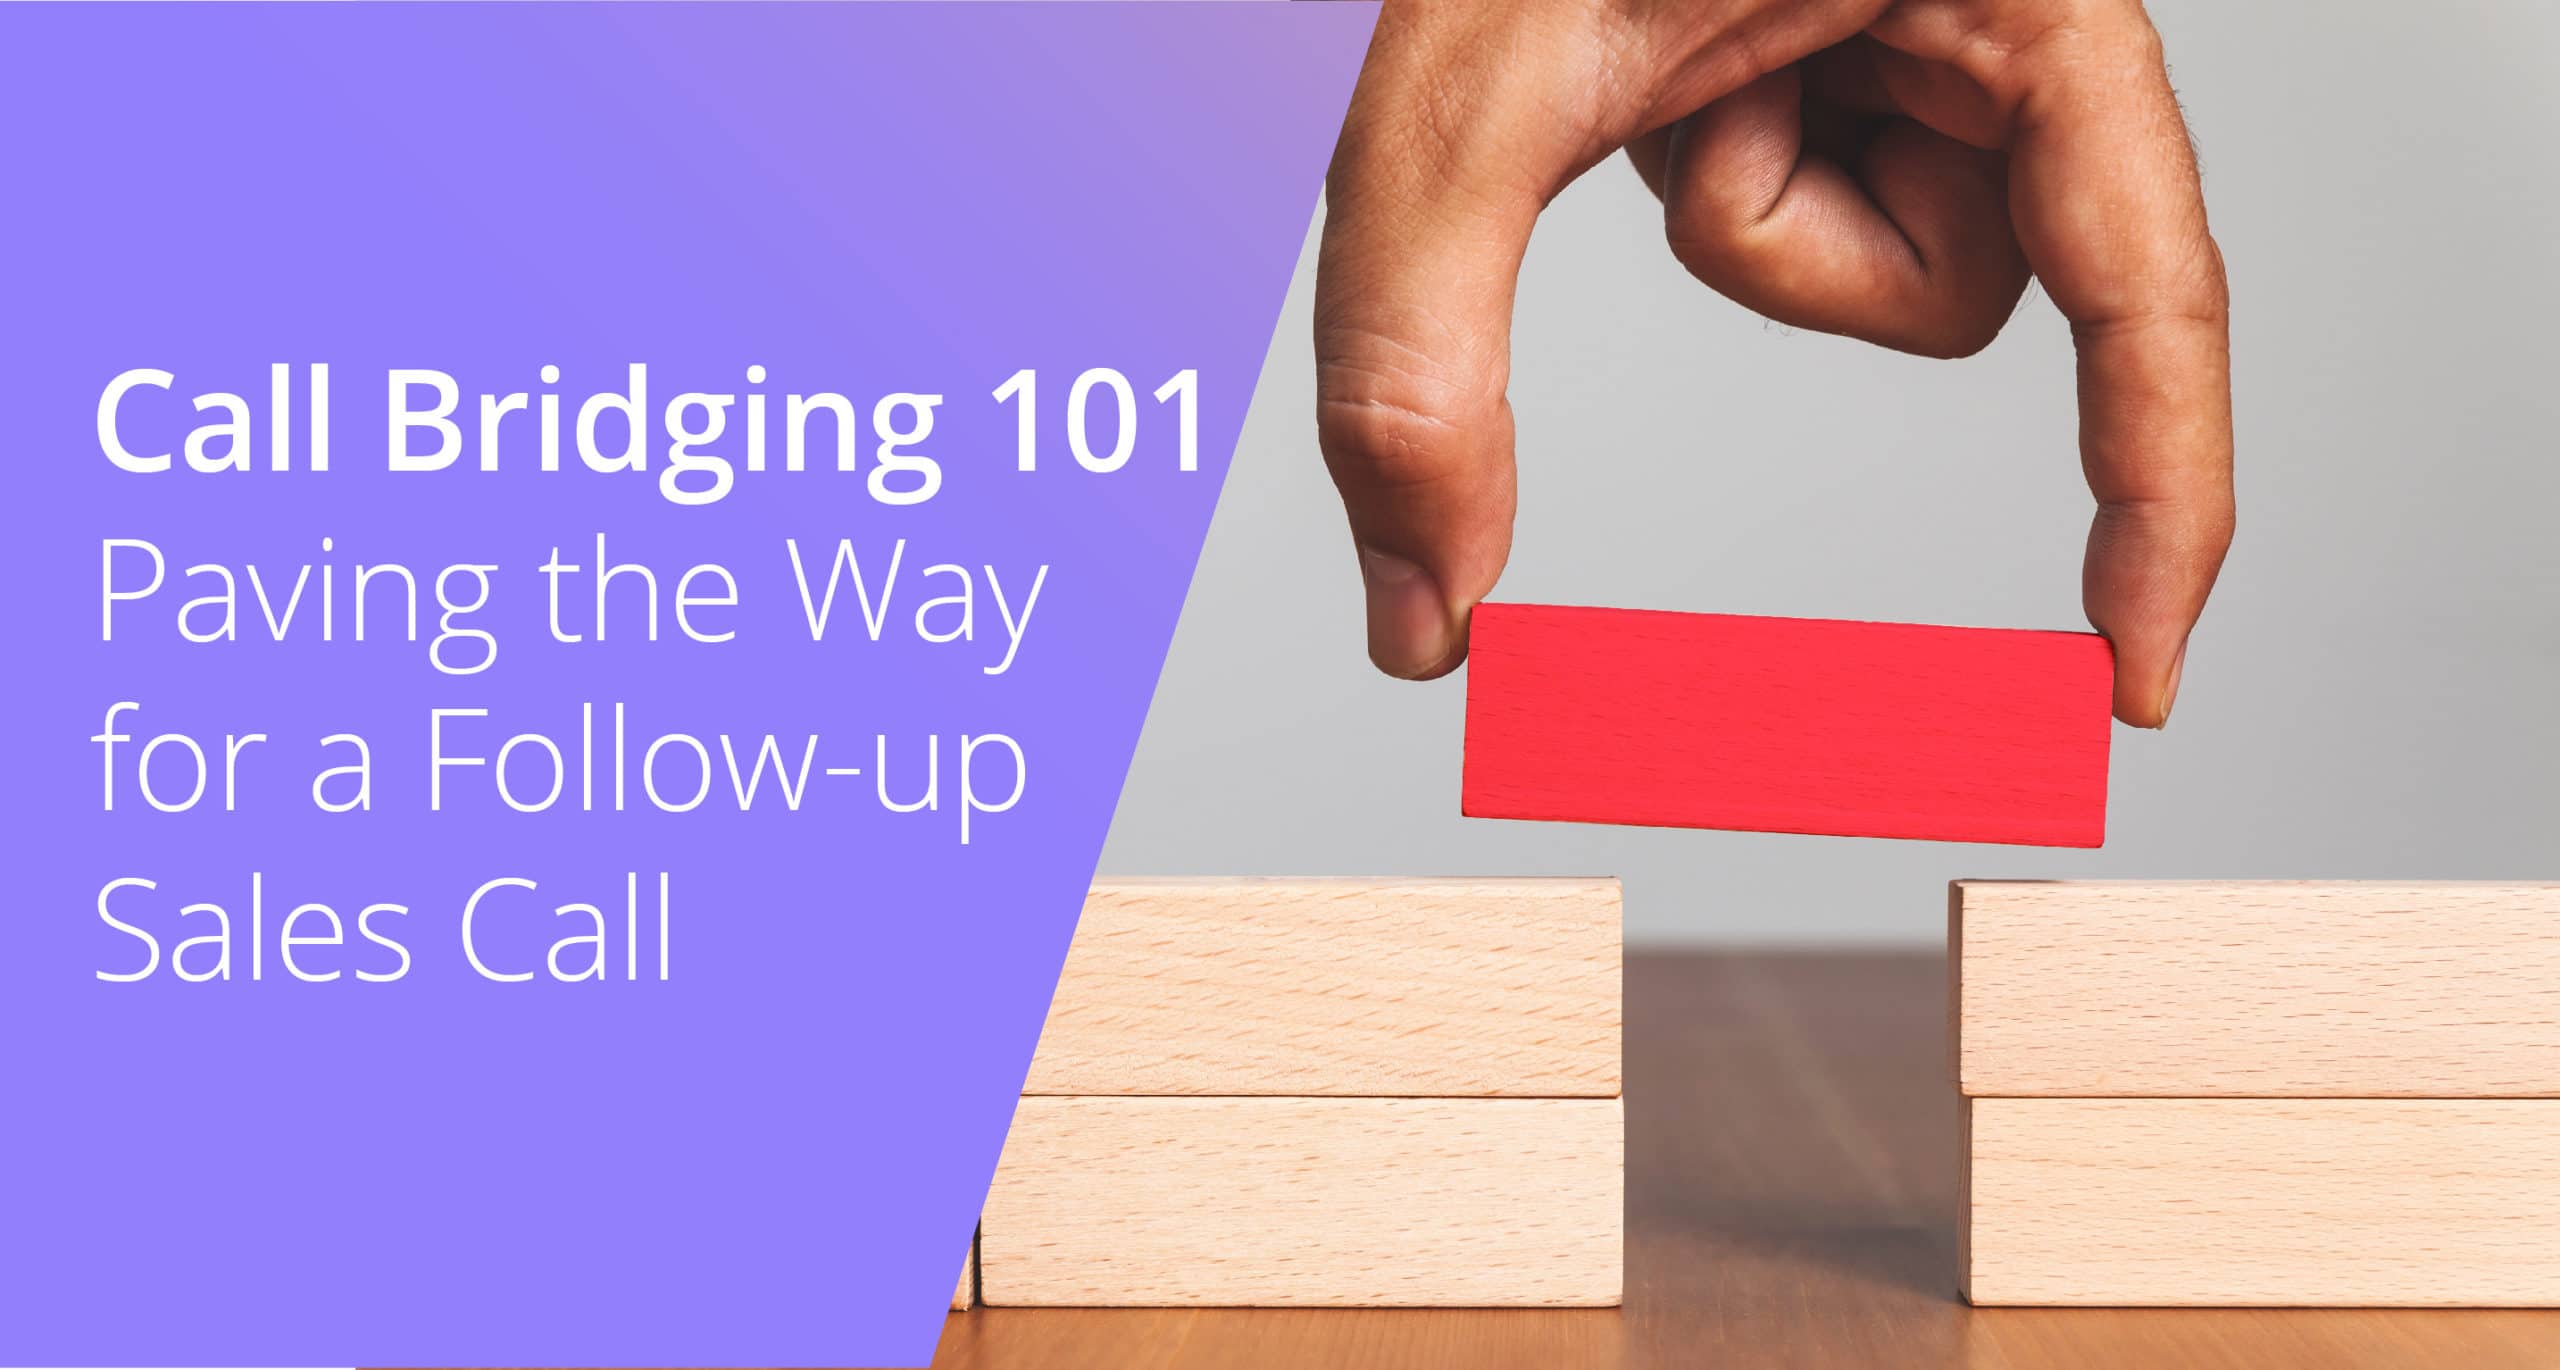 Call Bridging 101: Paving the Way for a Follow-up Sales Call